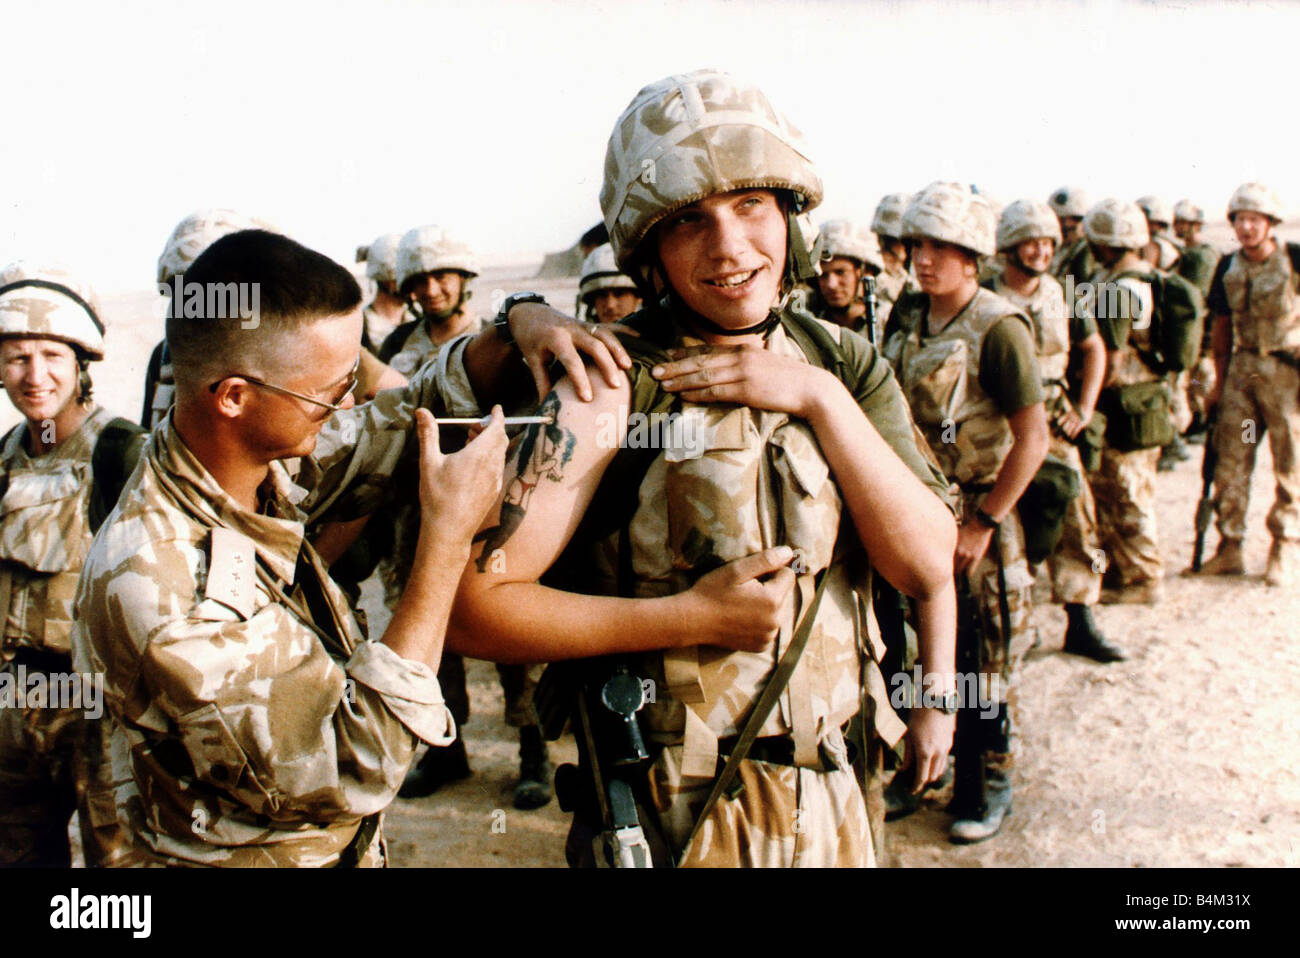 Gulf War 1990 1991 Soldiers receive their inoculation againt chemical weapons attack during a training exercise in the desert prior to Operation Desert Storm Stock Photo